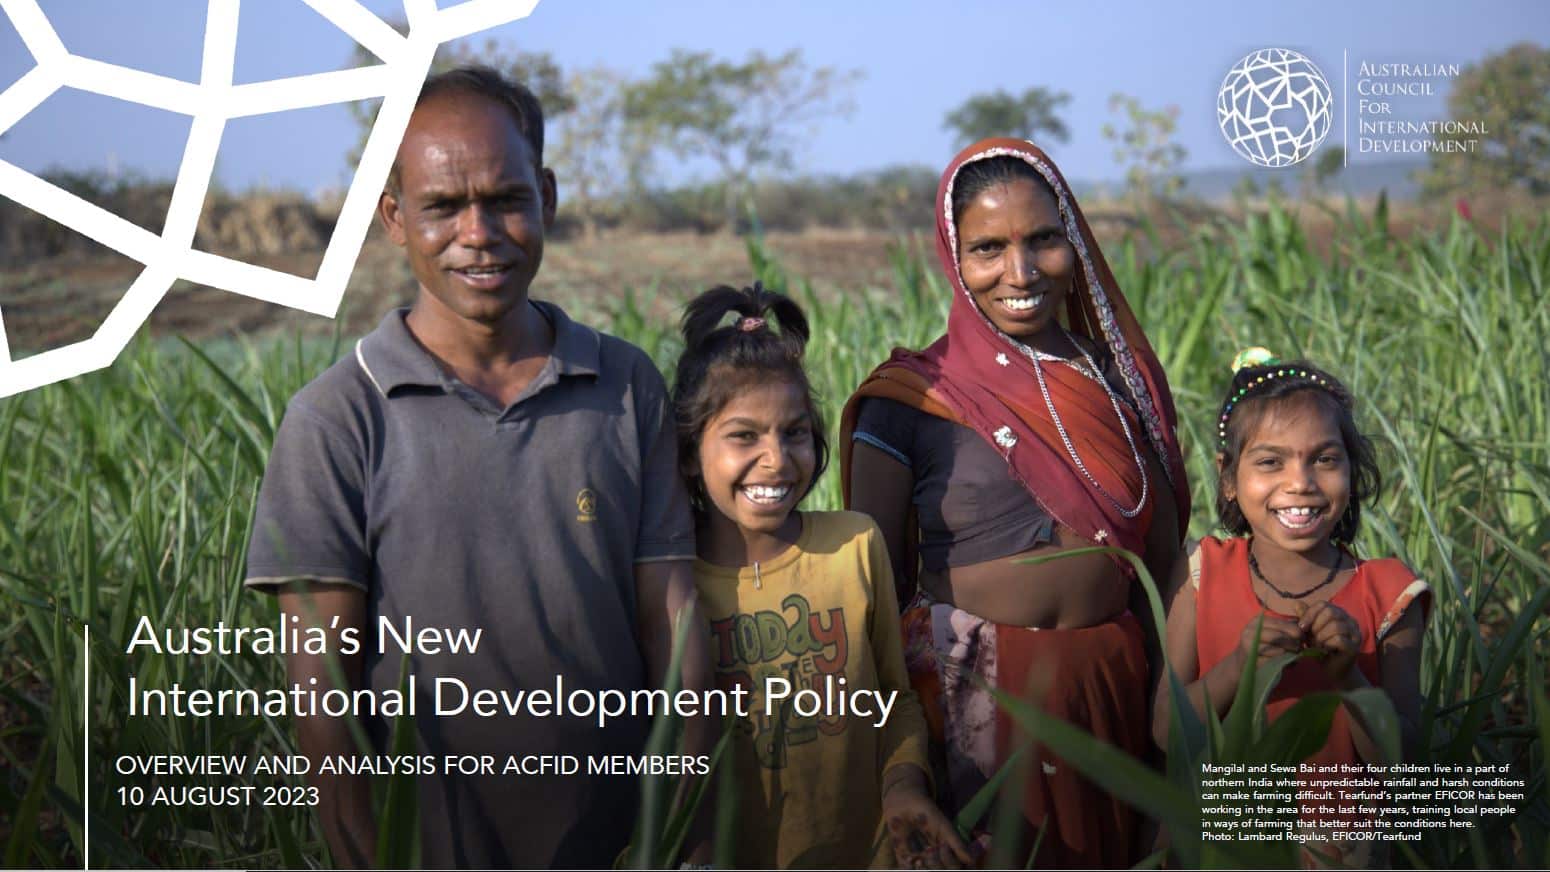 ACFID's Analysis of the International Development Policy Front Cover